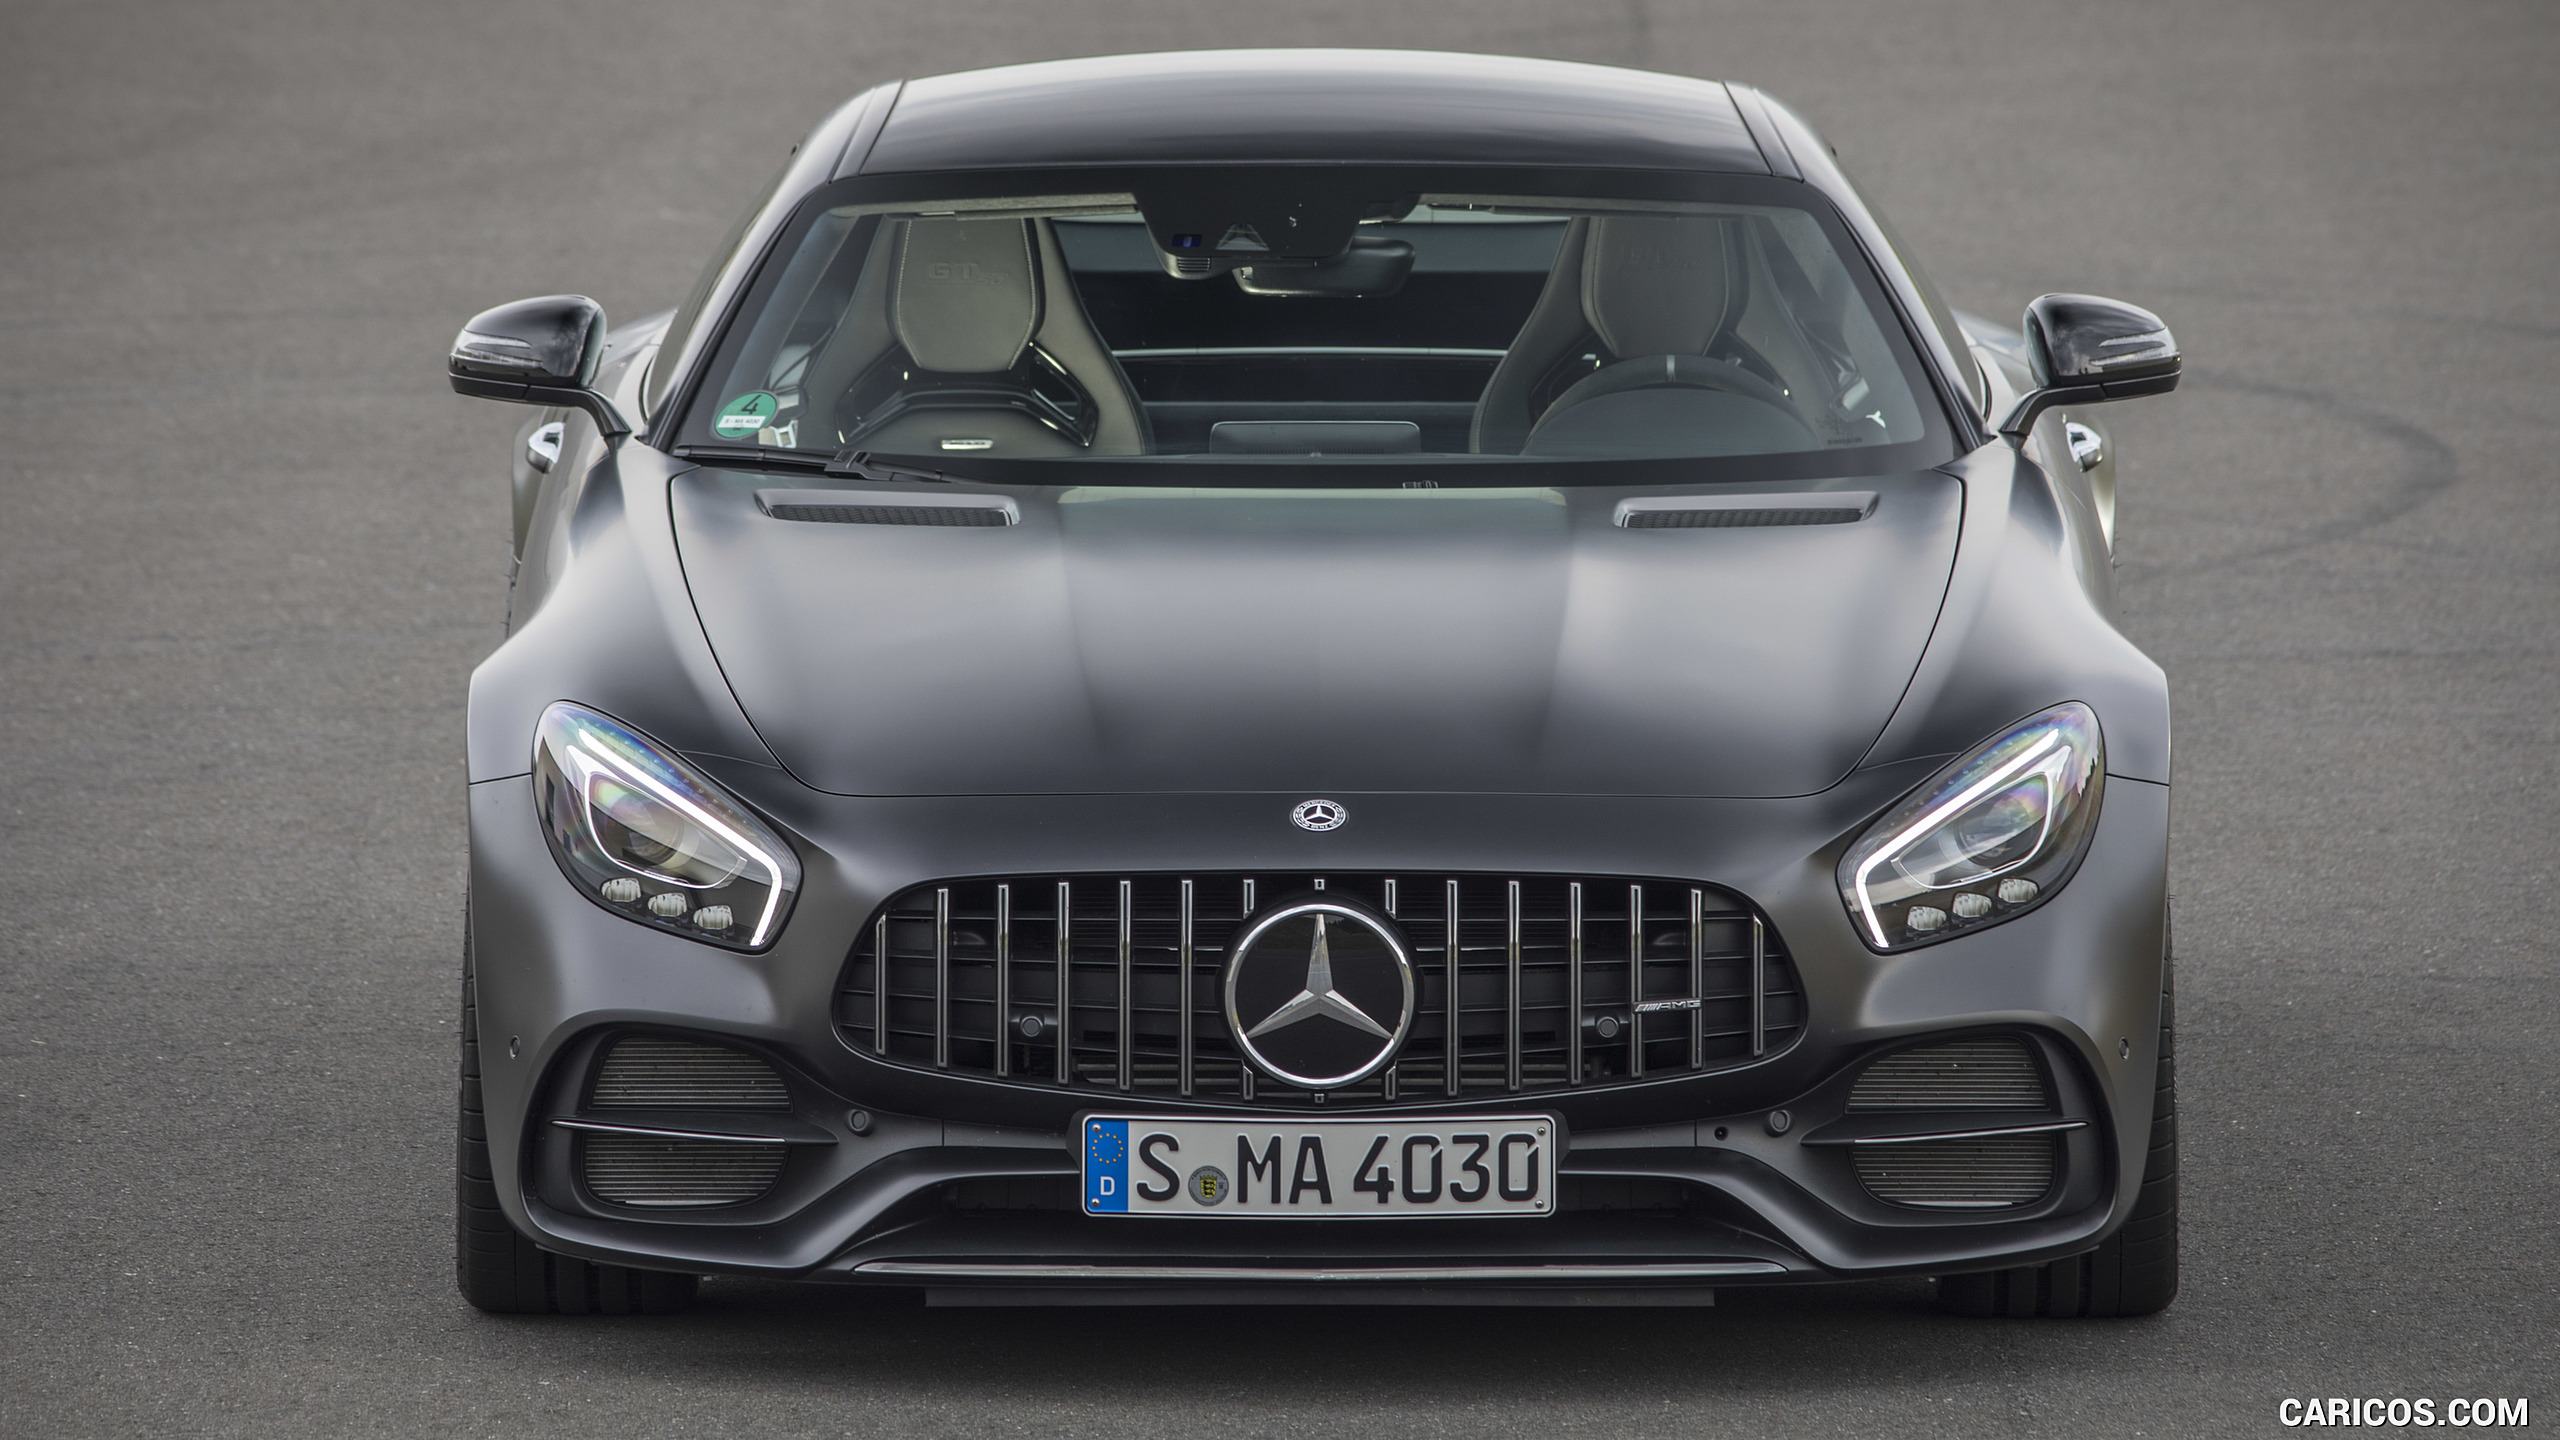 2018 Mercedes-AMG GT C Coupe Edition 50 - Front, #37 of 70